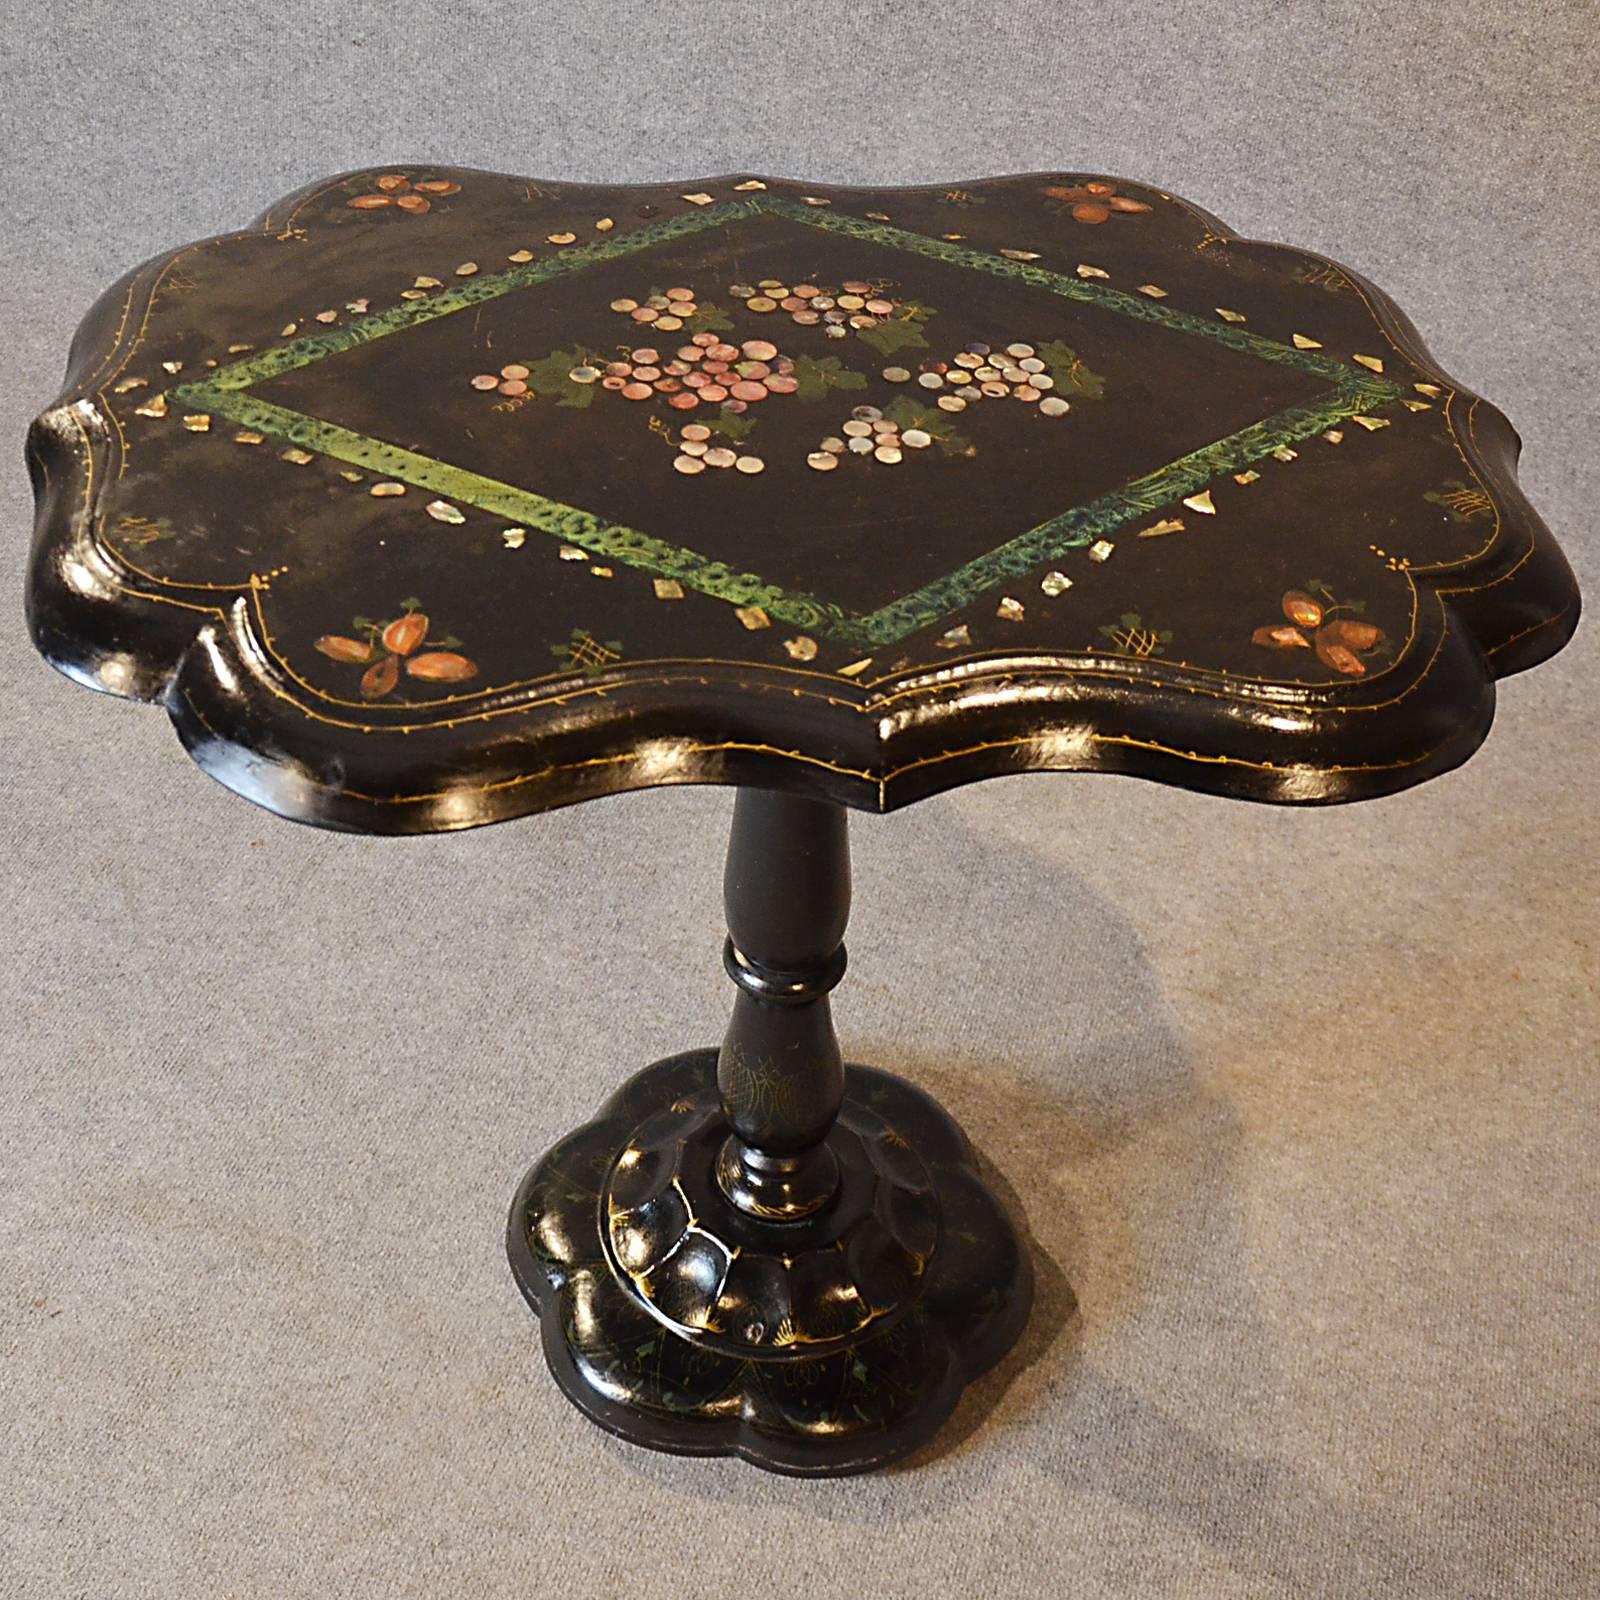 Mother-of-Pearl Table Ebonized Papier Mâché Mother of Pearl Side Lamp Wine Tilt, circa 1870